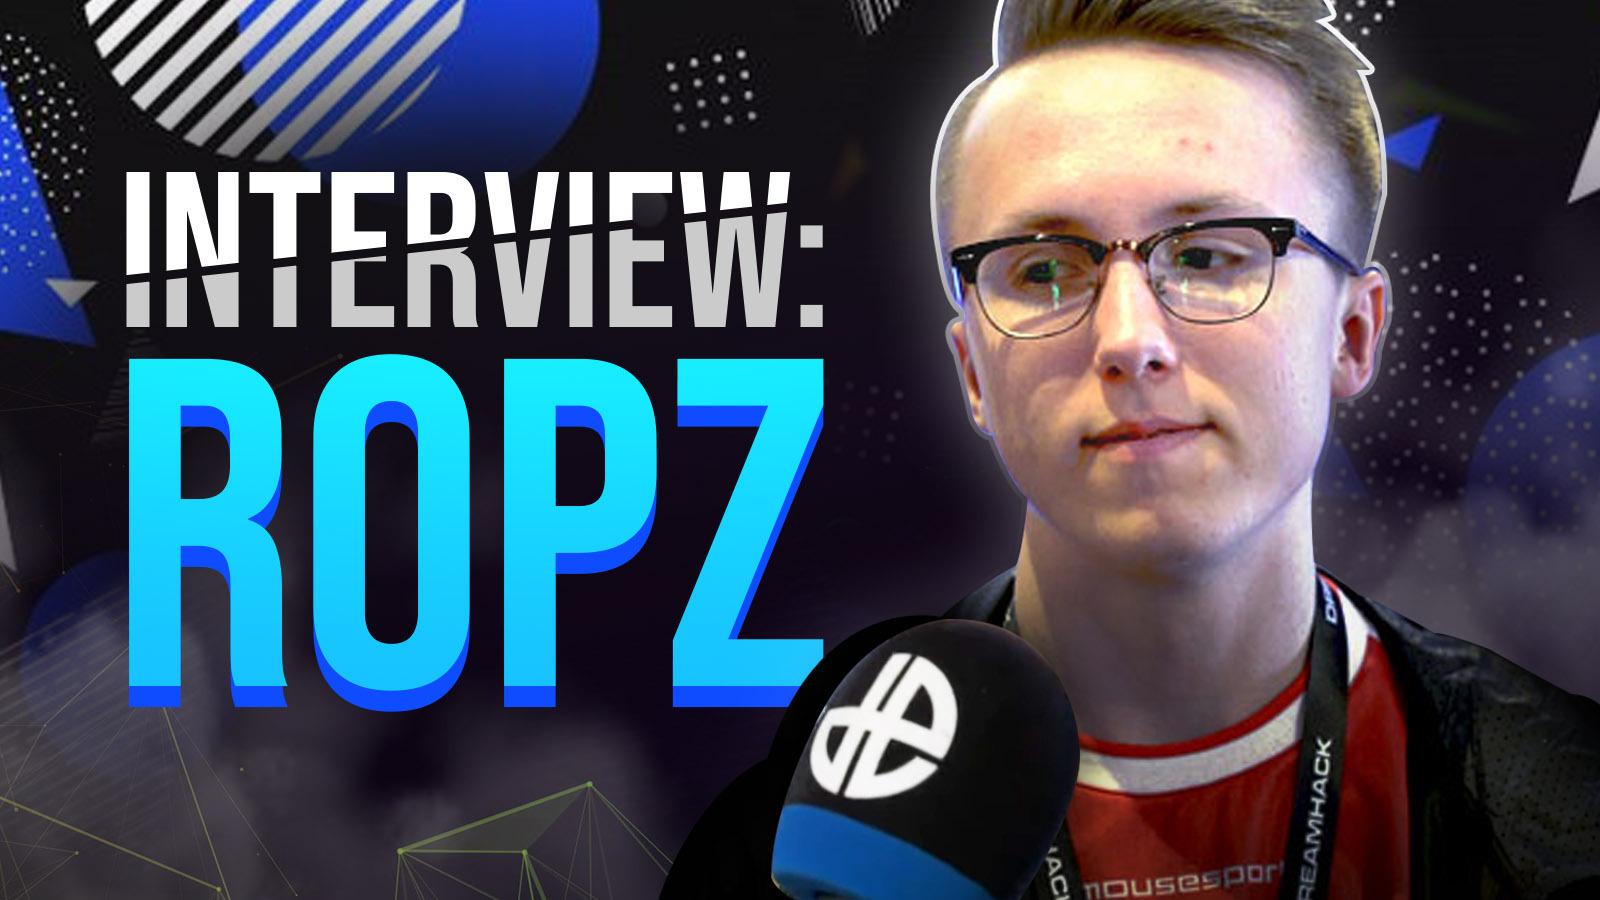 Ropz interview brought to you by Team Razer.